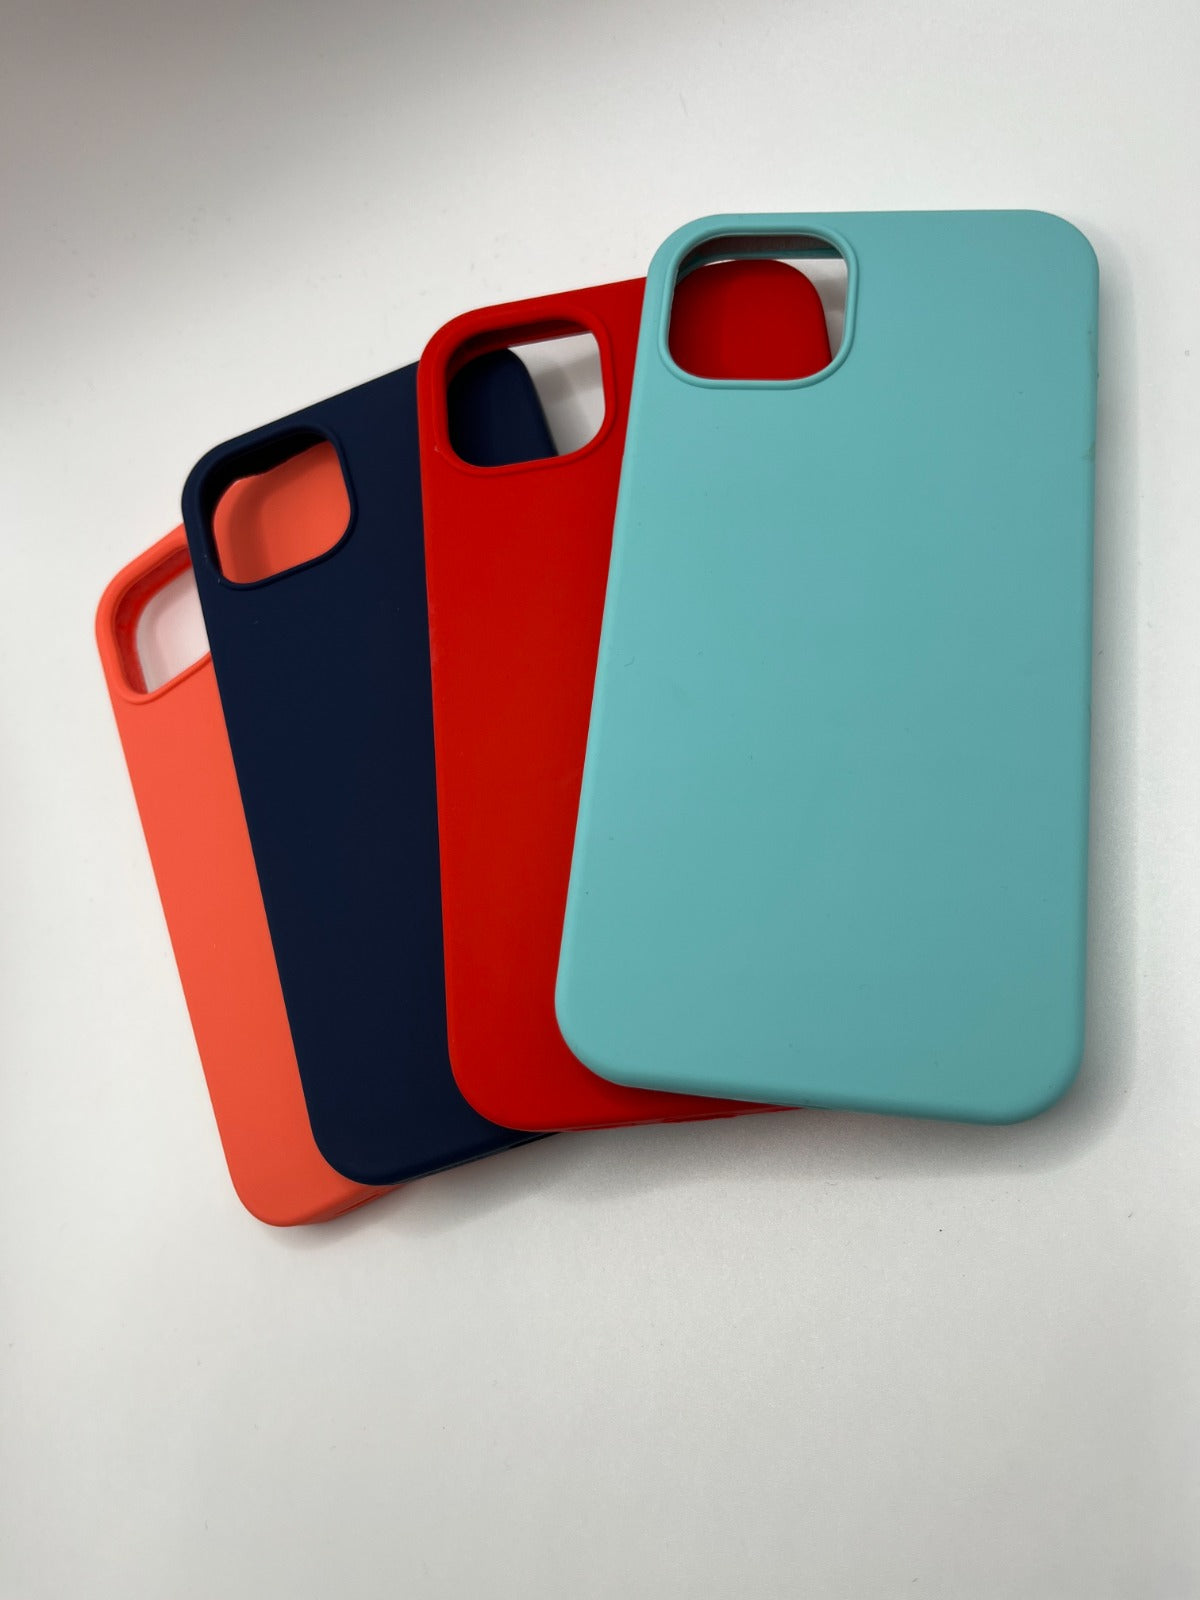 Iphone 12 Pro Max Soft Silicone Back Case